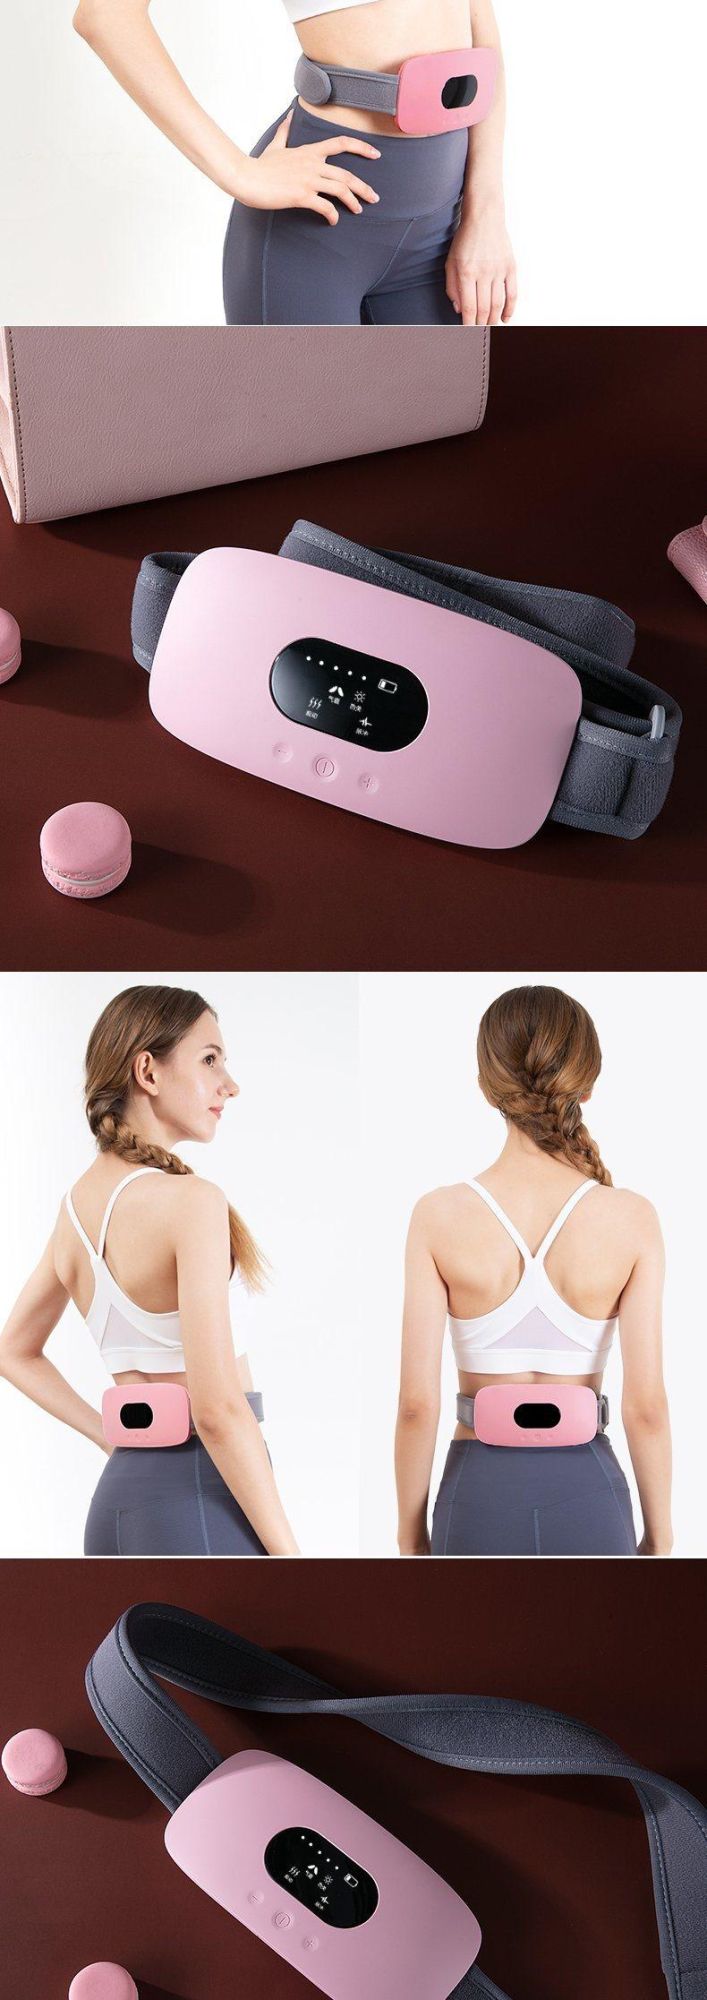 Hezheng Electric Slimming Massage Belt Pain Relief Electric Massager Heating Pad Heated Belly Massager